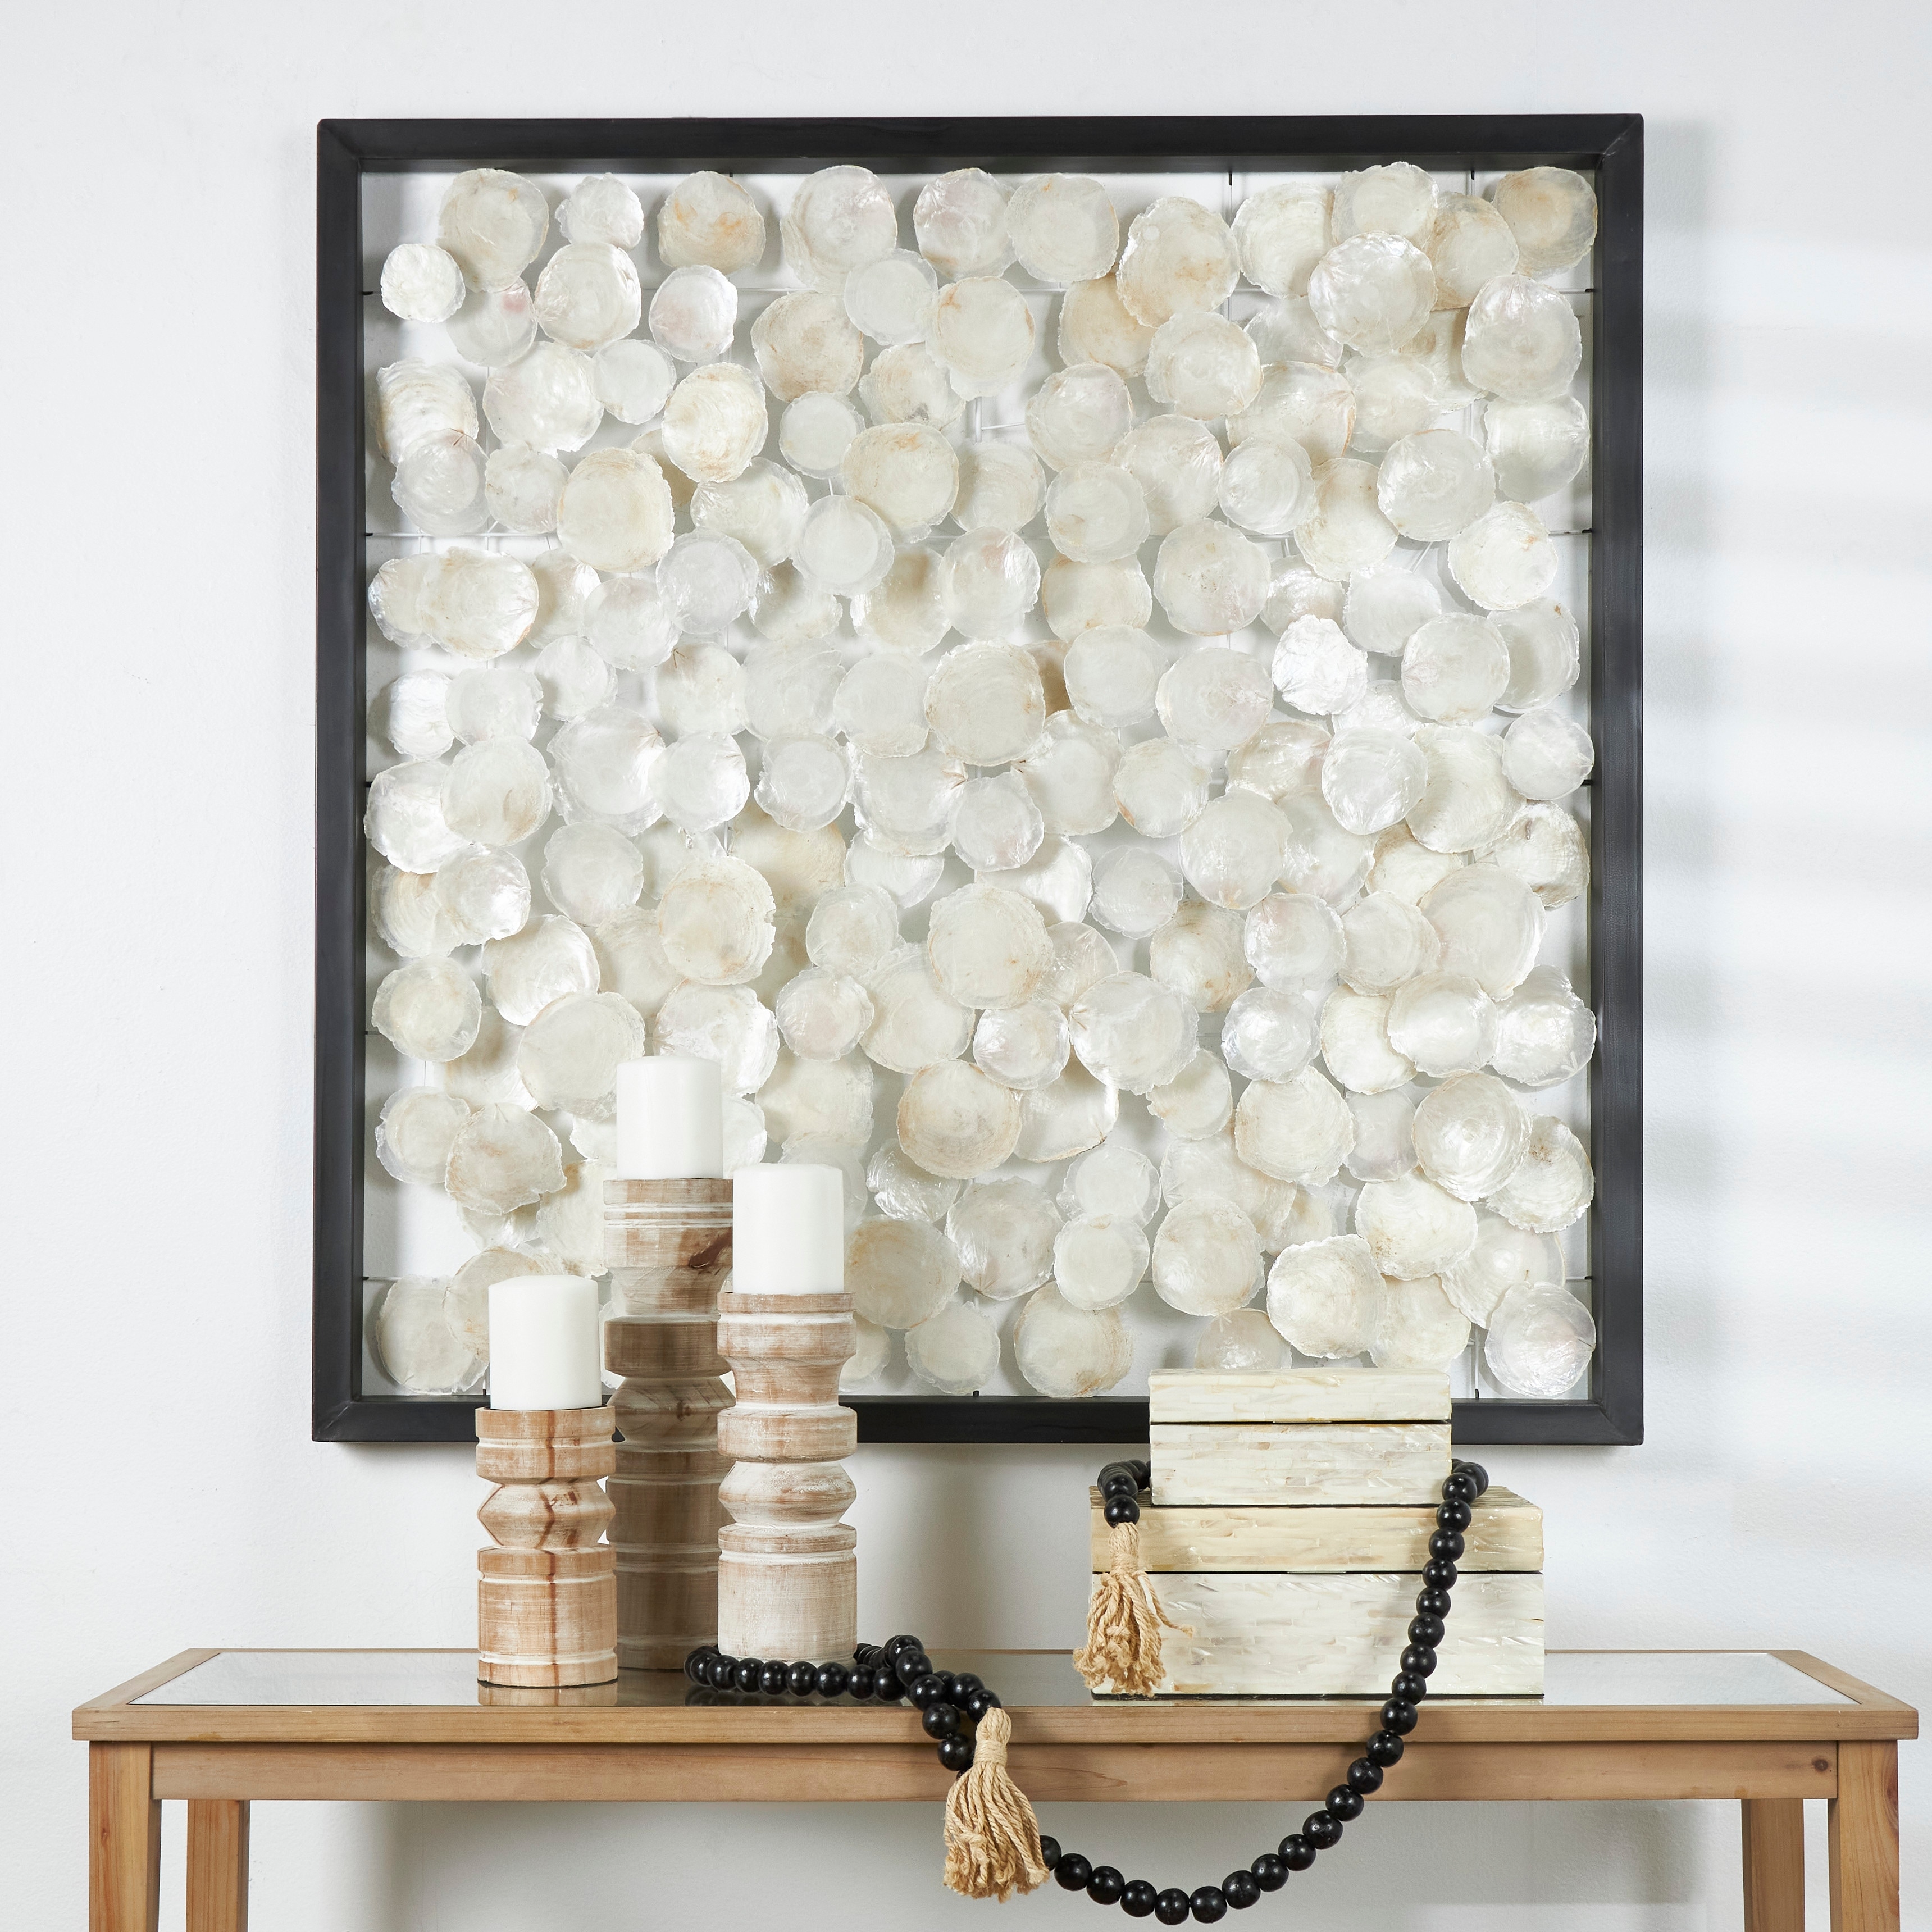 40 Sq White Capiz Shells in a Black Frame Wall Plaque - Wilford & Lee Home  Accents